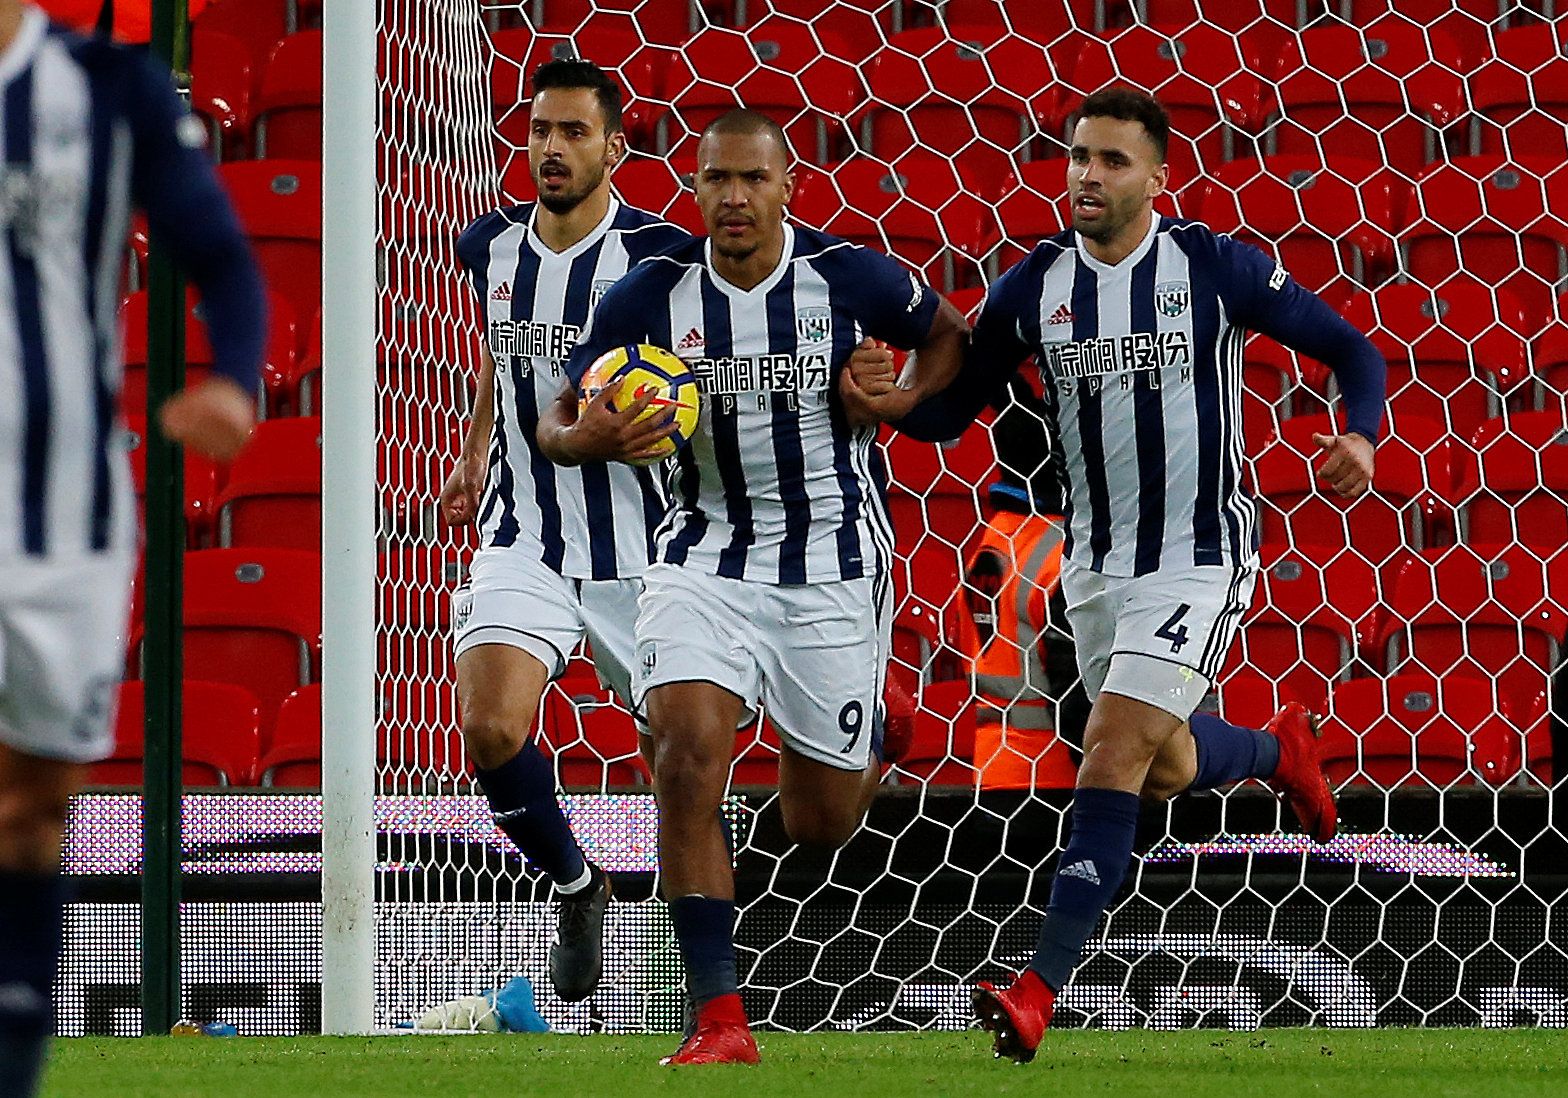 Soccer Football - Premier League - Stoke City vs West Bromwich Albion - bet365 Stadium, Stoke-on-Trent, Britain - December 23, 2017   West Bromwich Albion's Salomon Rondon celebrates scoring their first goal with Nacer Chadli and Hal Robson-Kanu    Action Images via Reuters/Craig Brough    EDITORIAL USE ONLY. No use with unauthorized audio, video, data, fixture lists, club/league logos or 